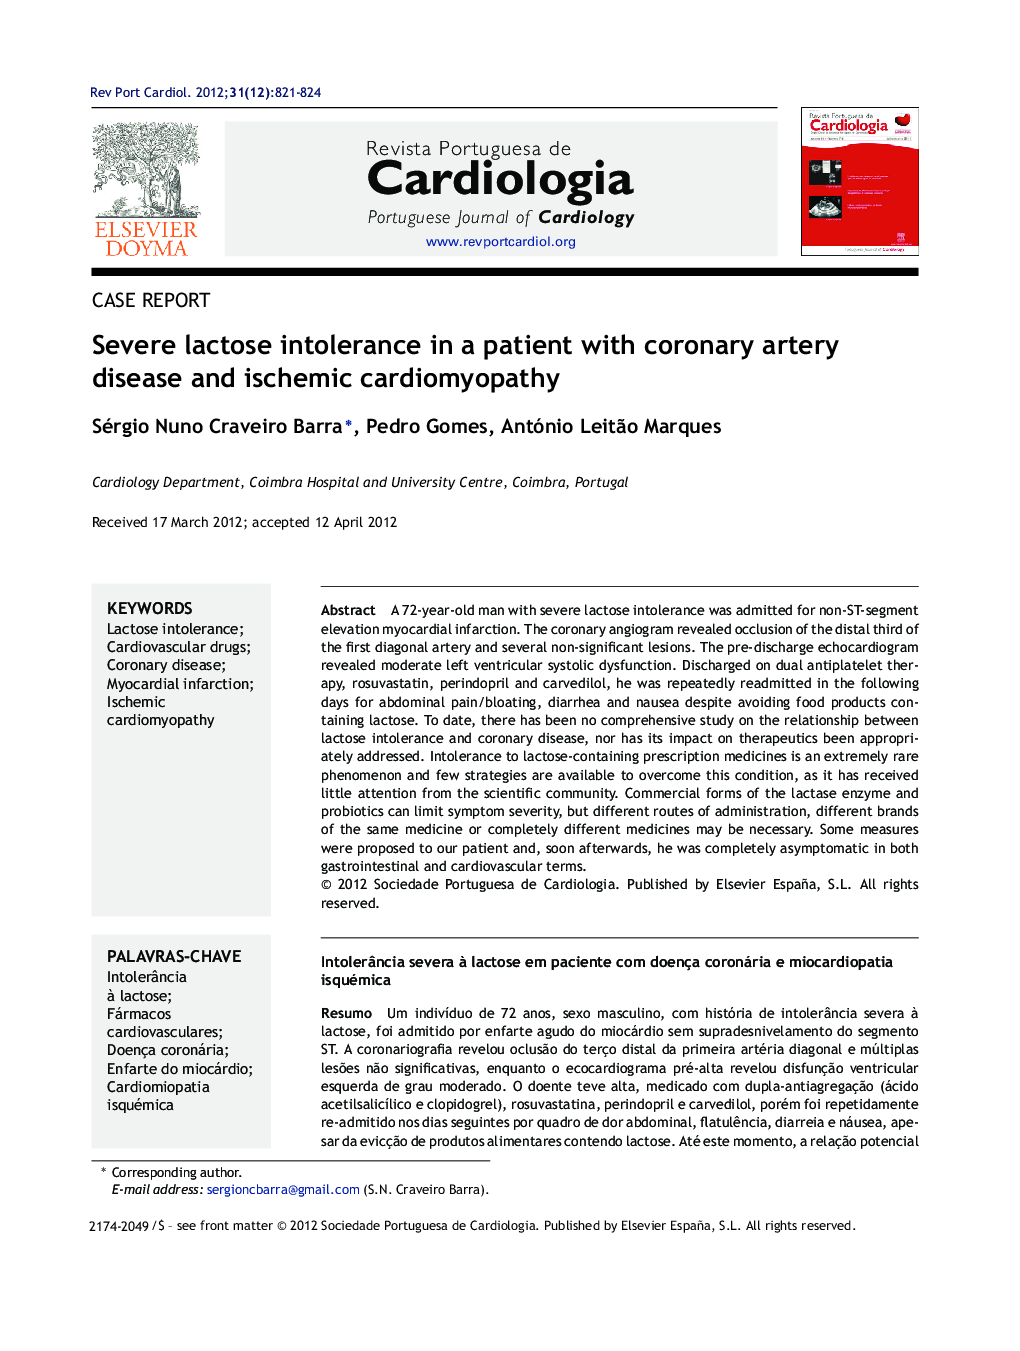 Severe lactose intolerance in a patient with coronary artery disease and ischemic cardiomyopathy